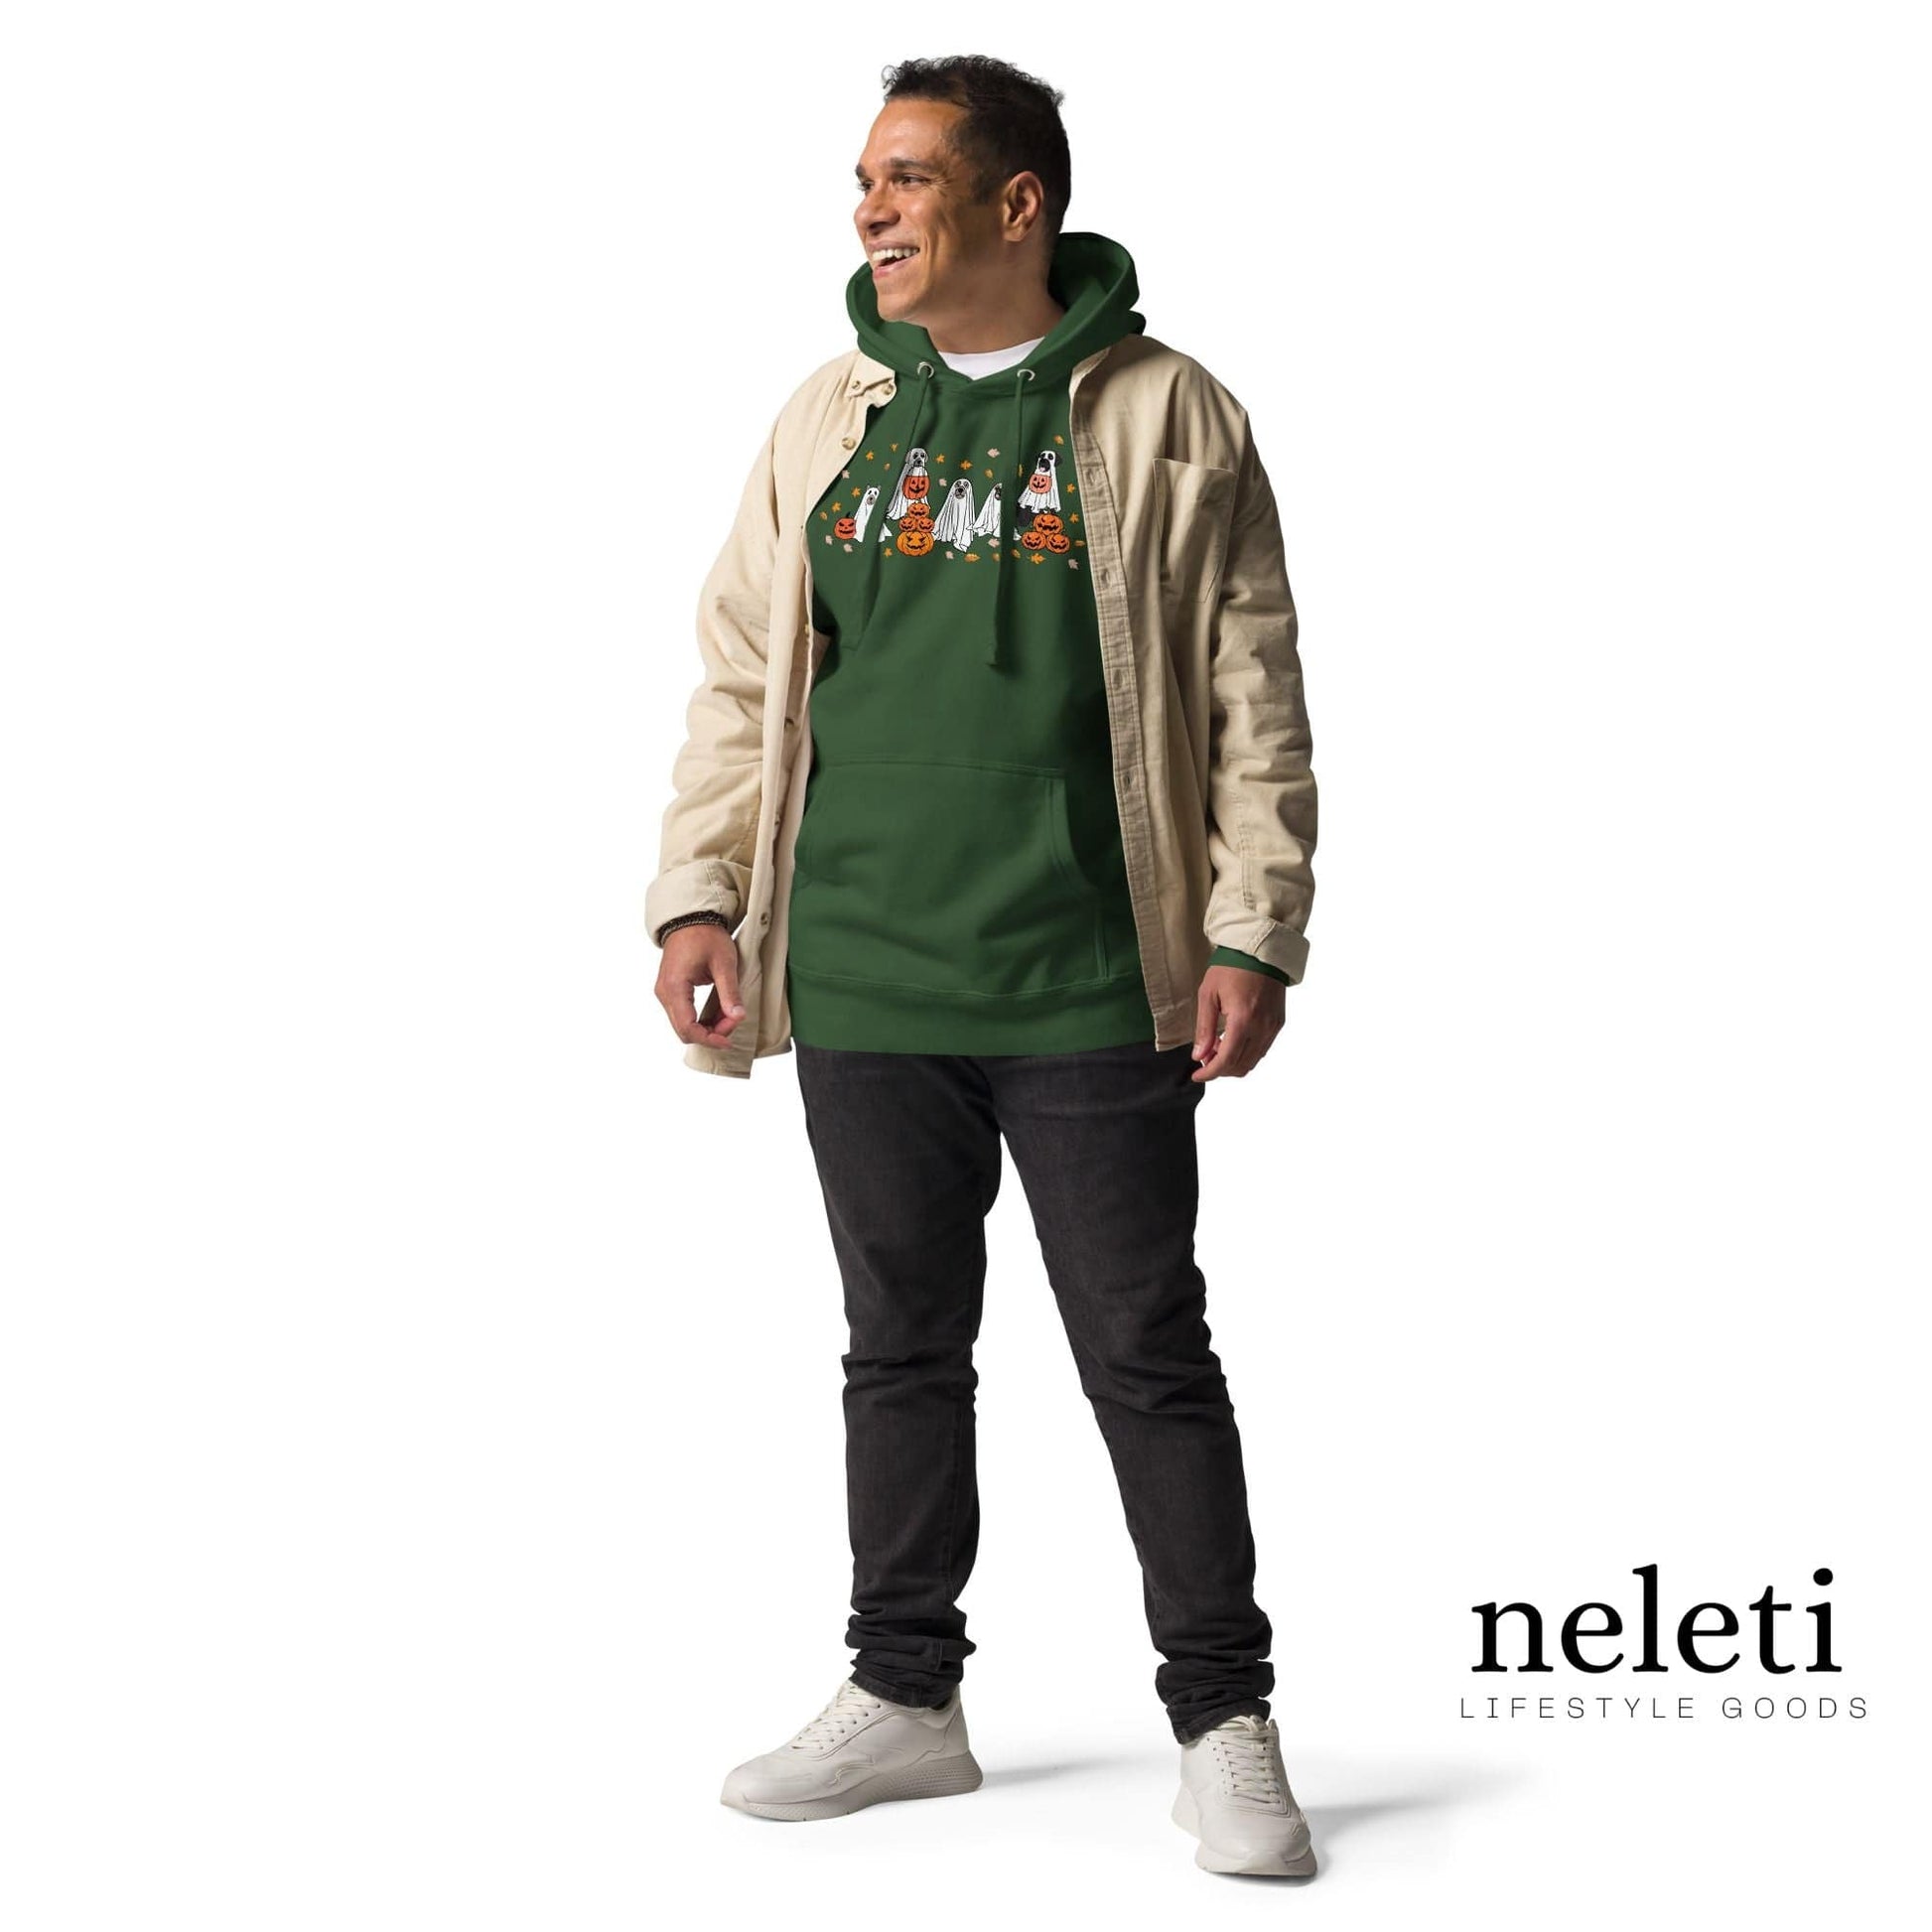 neleti.com-haloween-forest-green-hoodie-for-dog-lovers